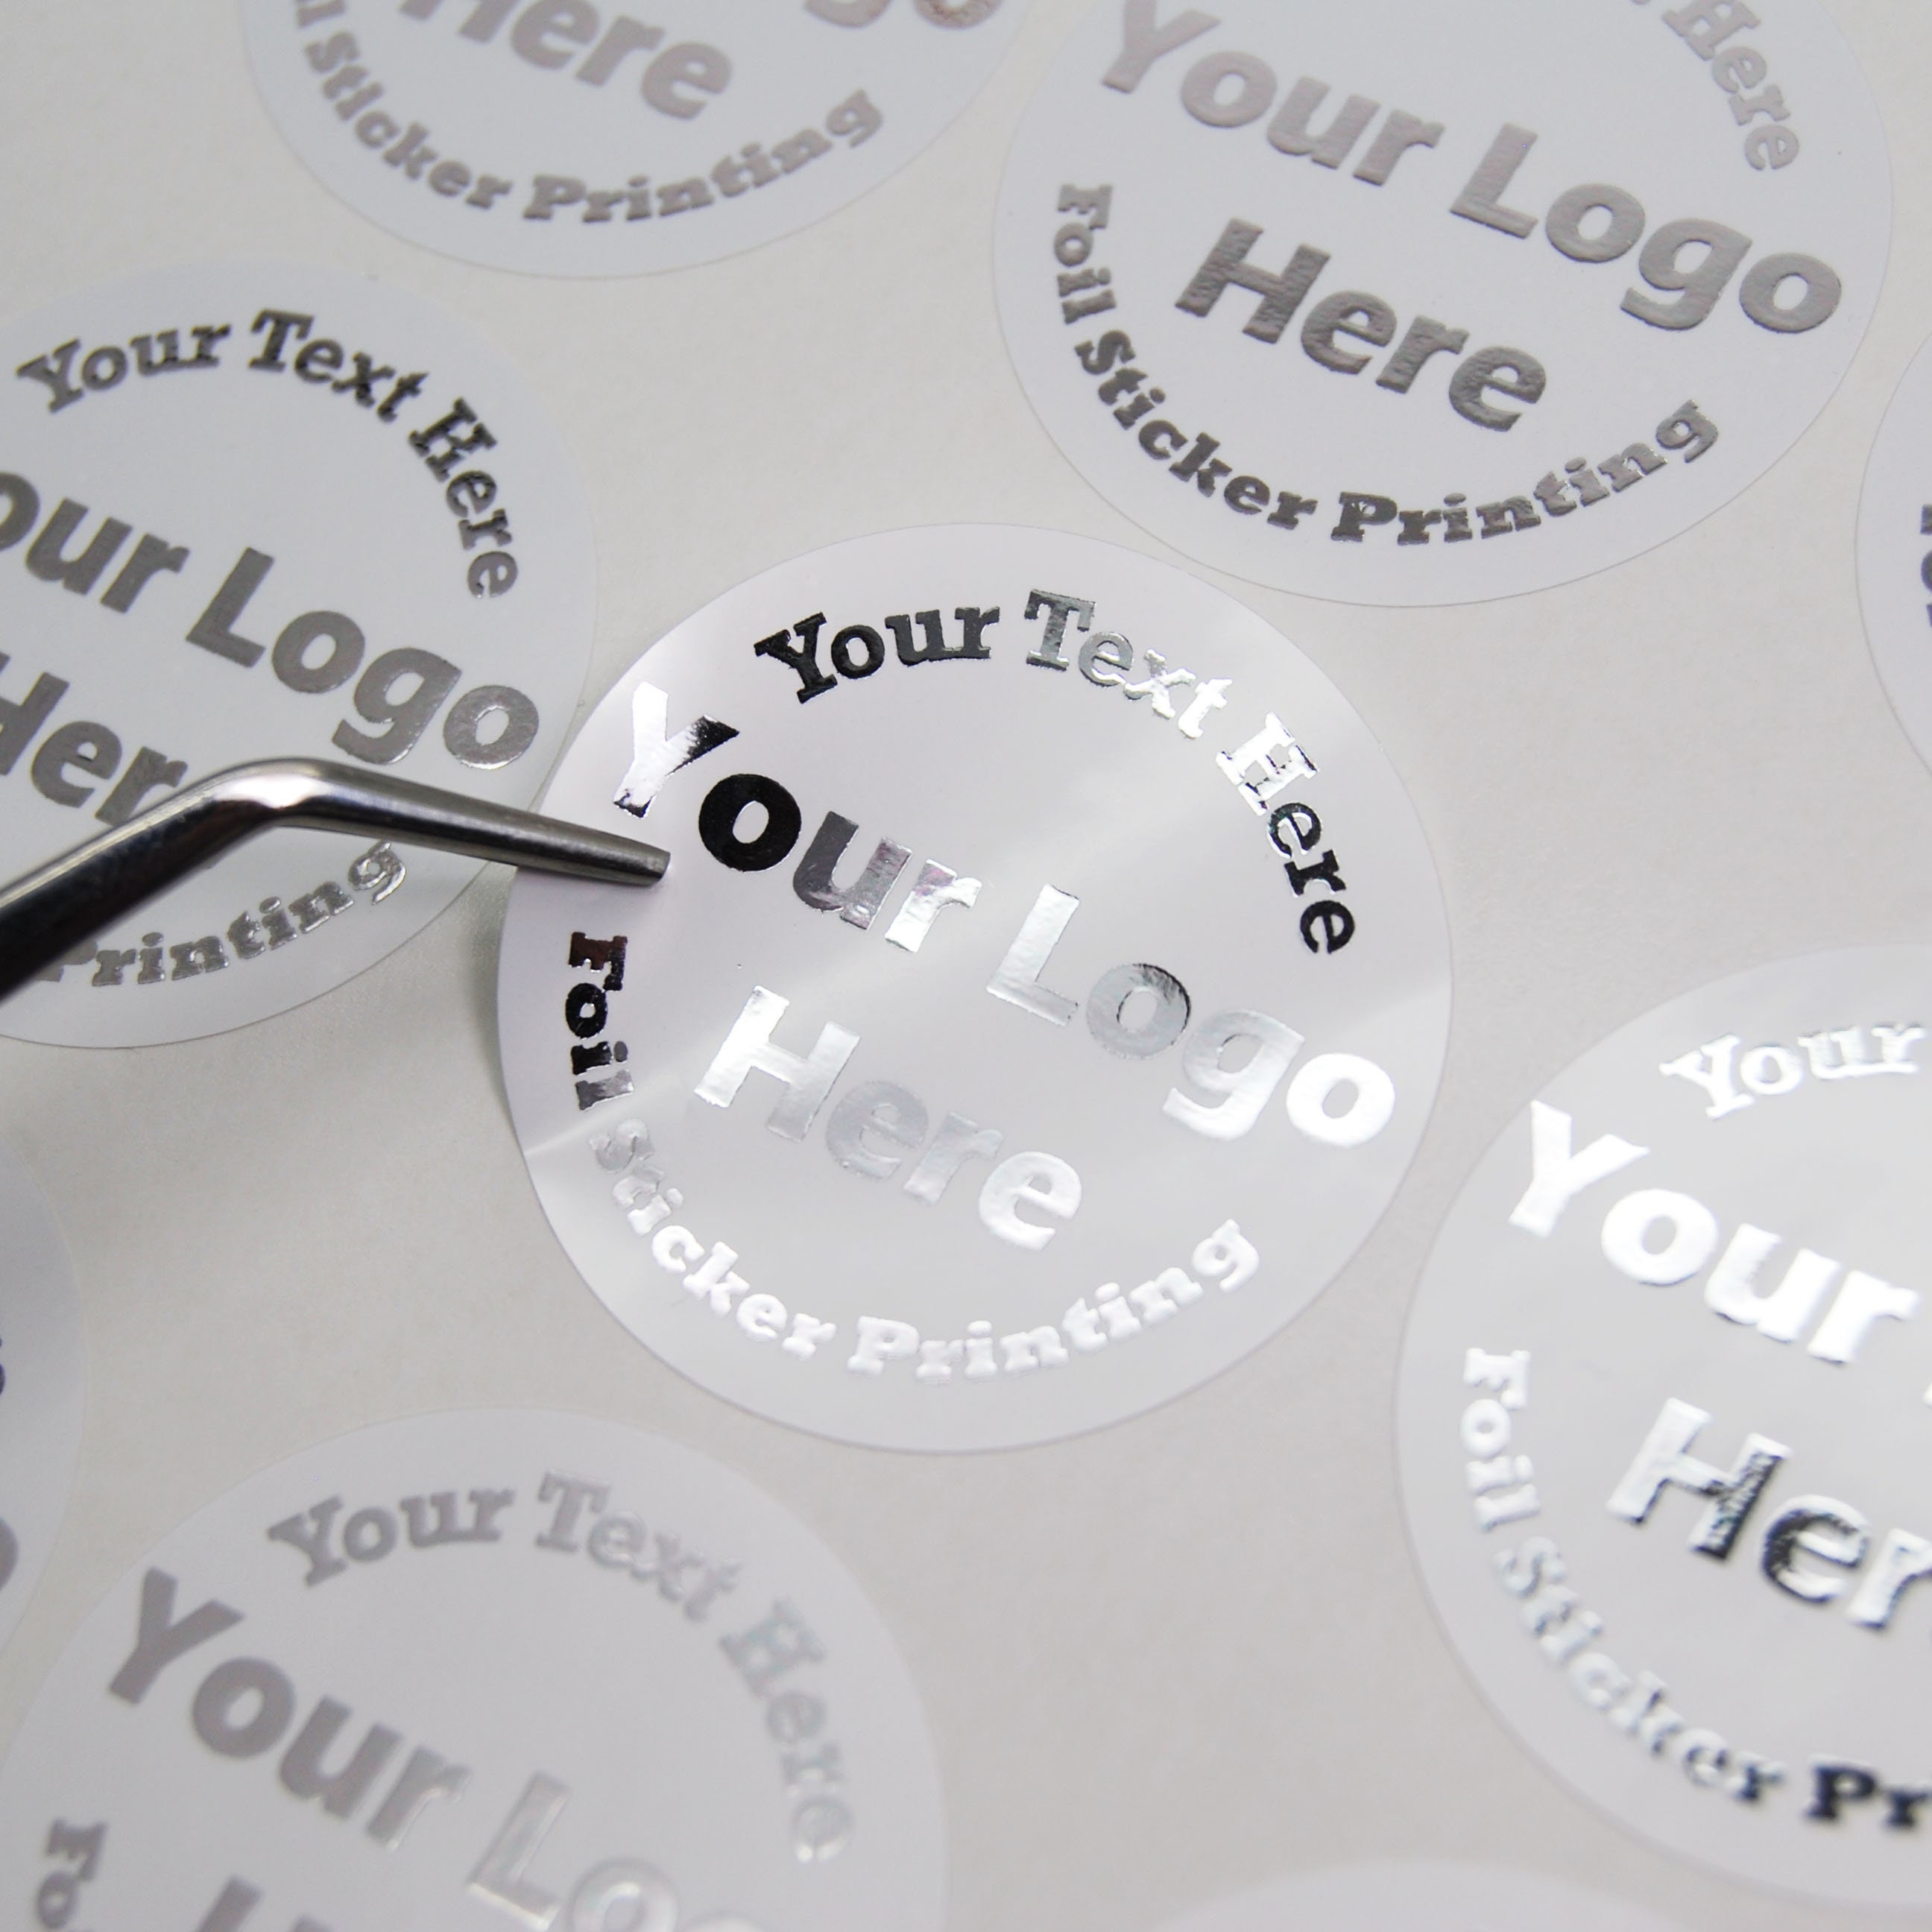 Personalised White Gloss 35mm Circle Foil Labels from £3.99